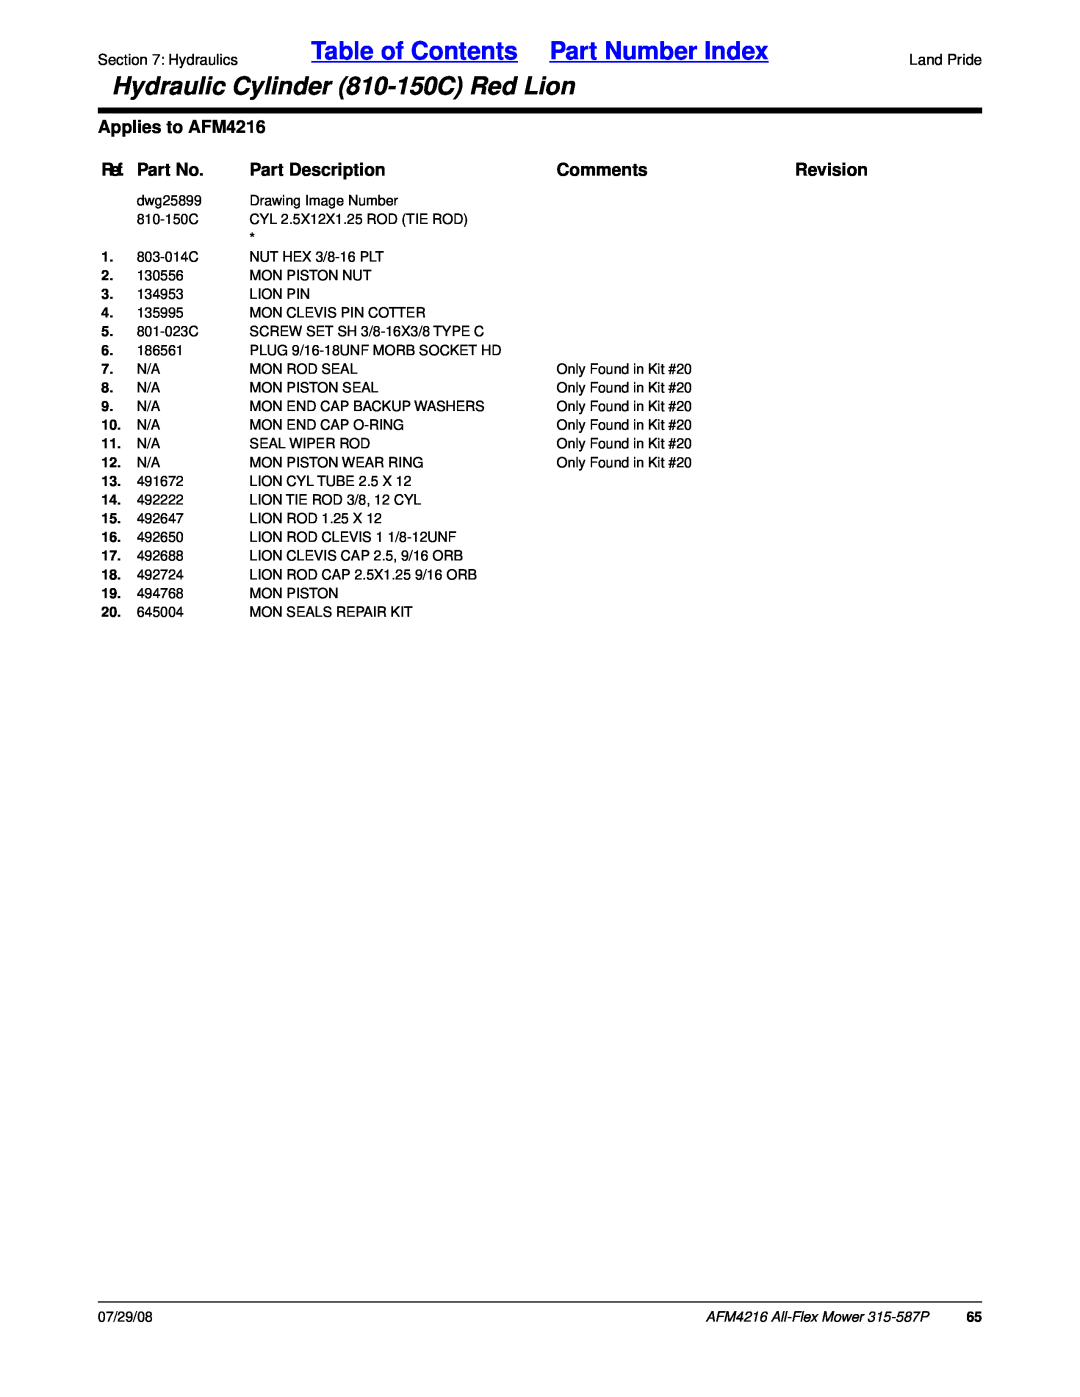 Land Pride Table of Contents Part Number Index, Hydraulic Cylinder 810-150CRed Lion, Applies to AFM4216, Ref. Part No 